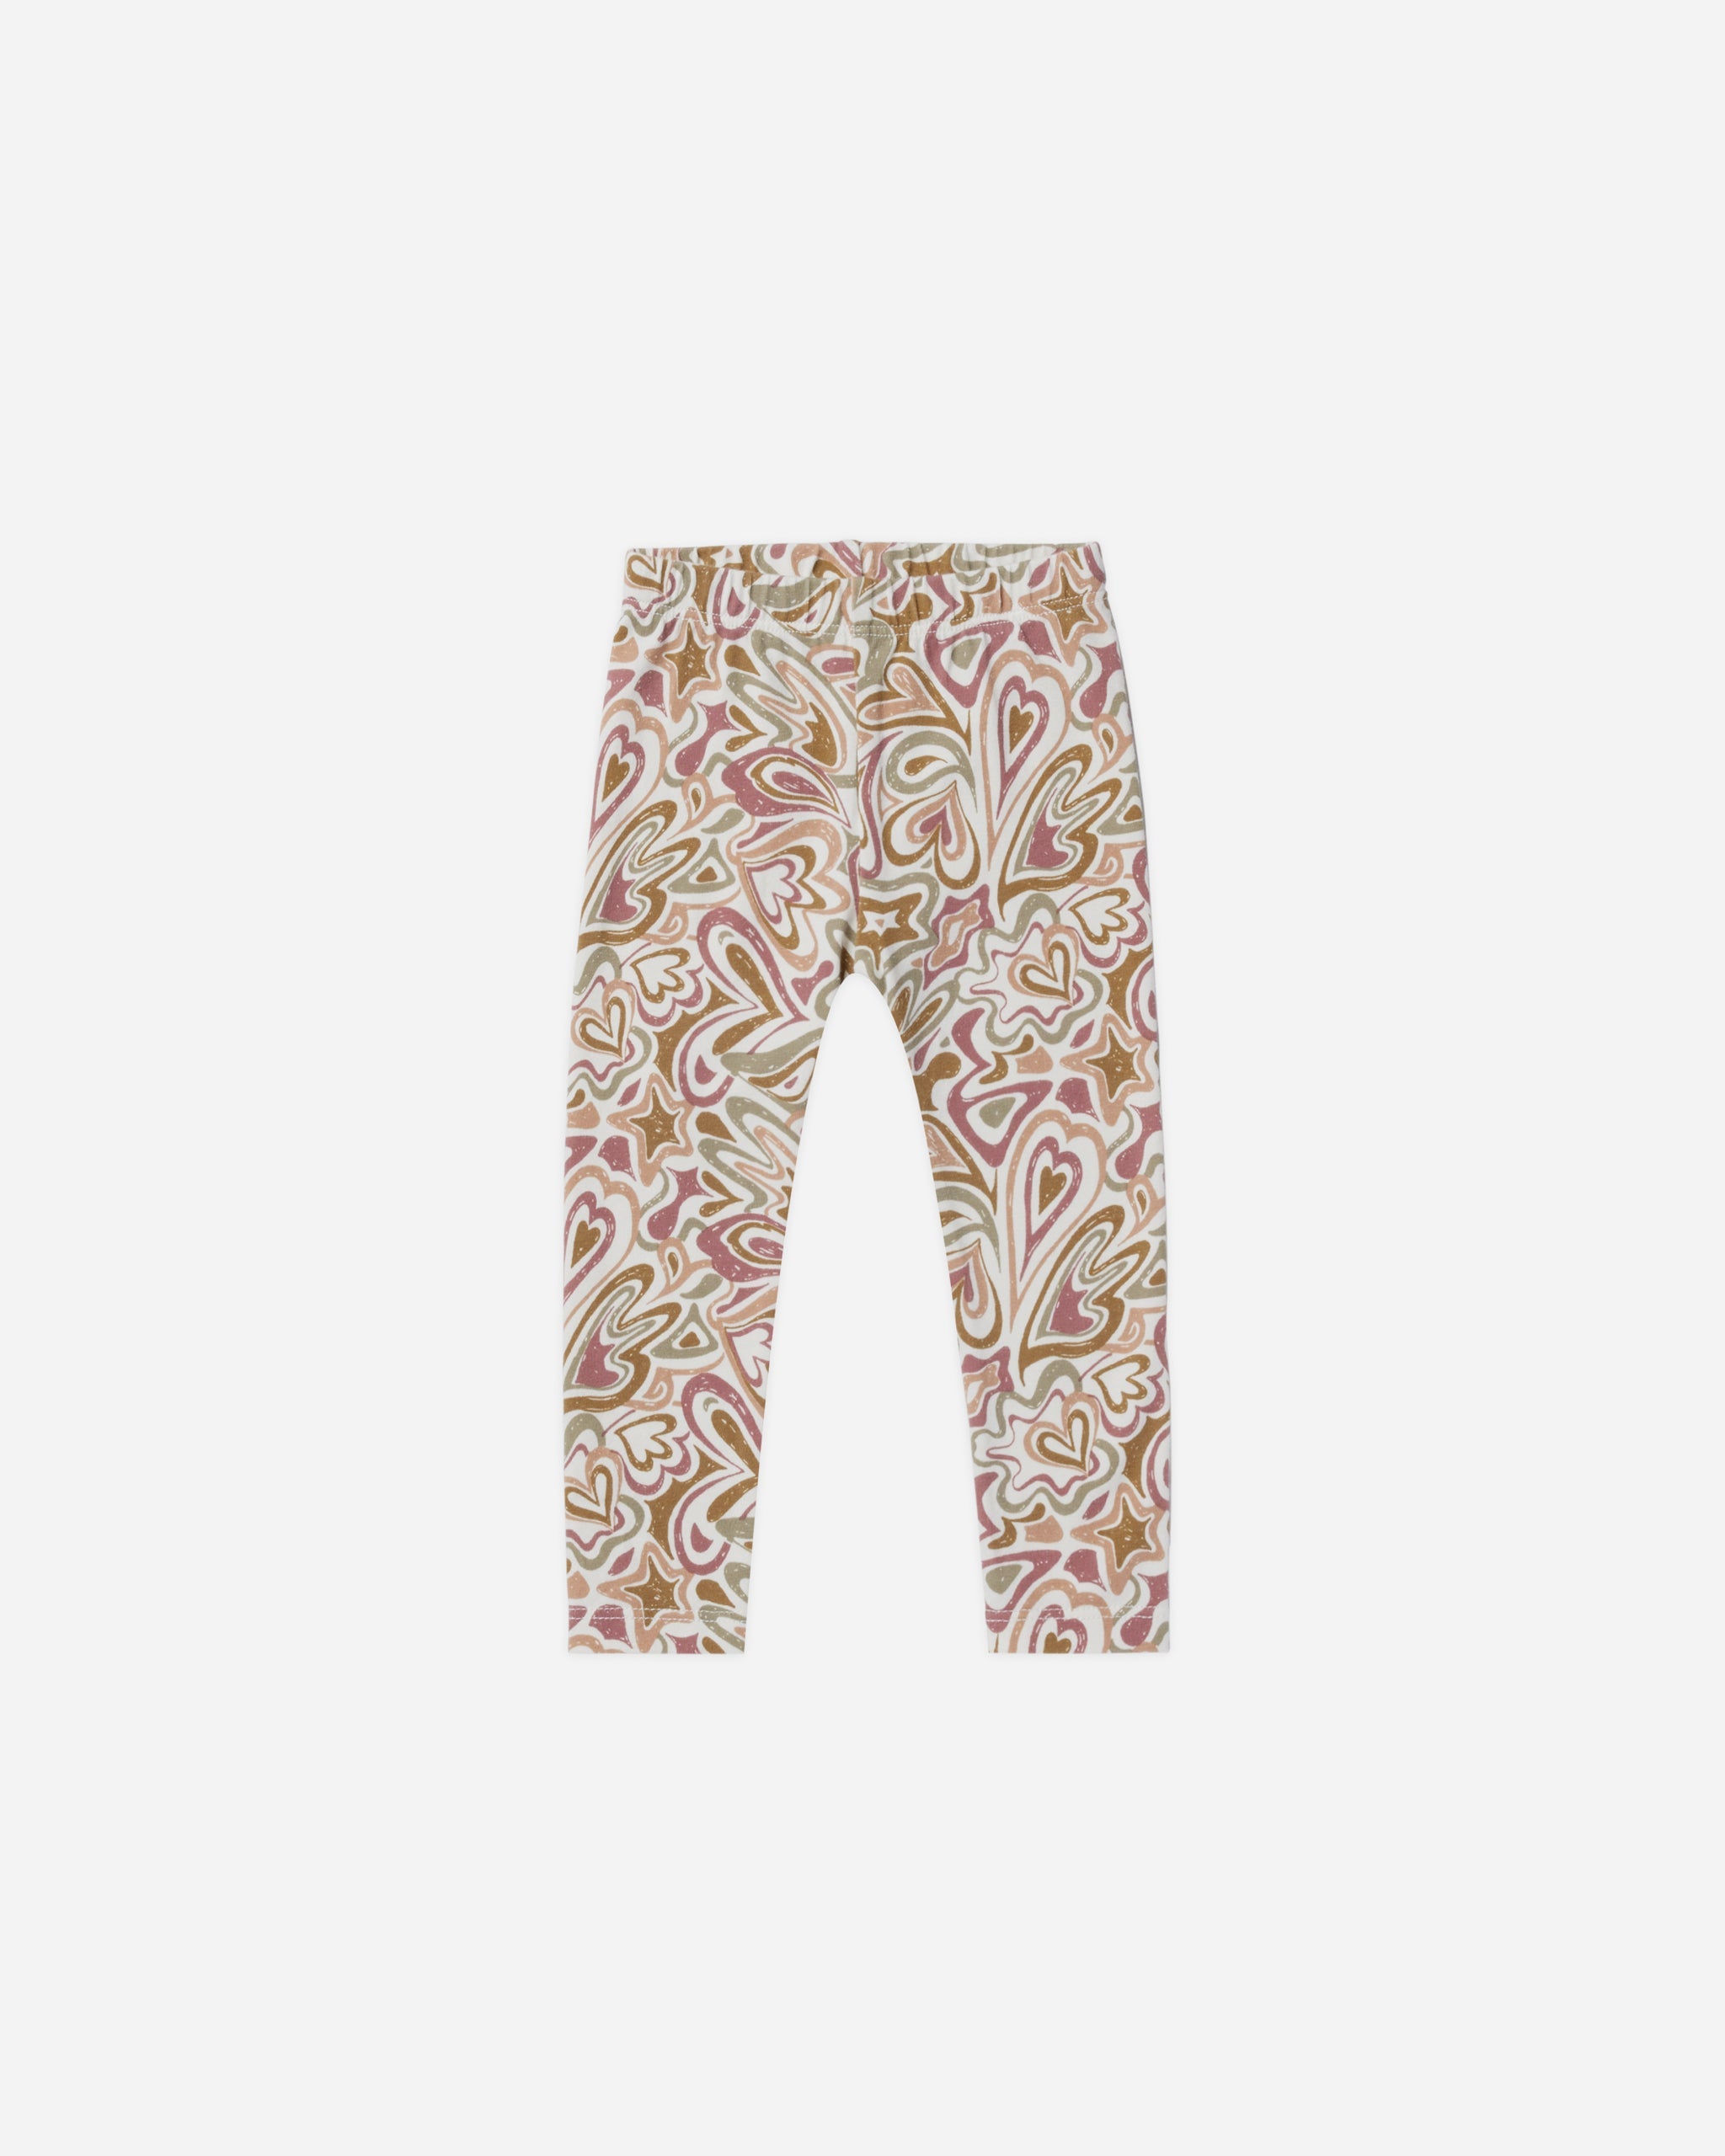 Legging || Groovy - Rylee + Cru | Kids Clothes | Trendy Baby Clothes | Modern Infant Outfits |